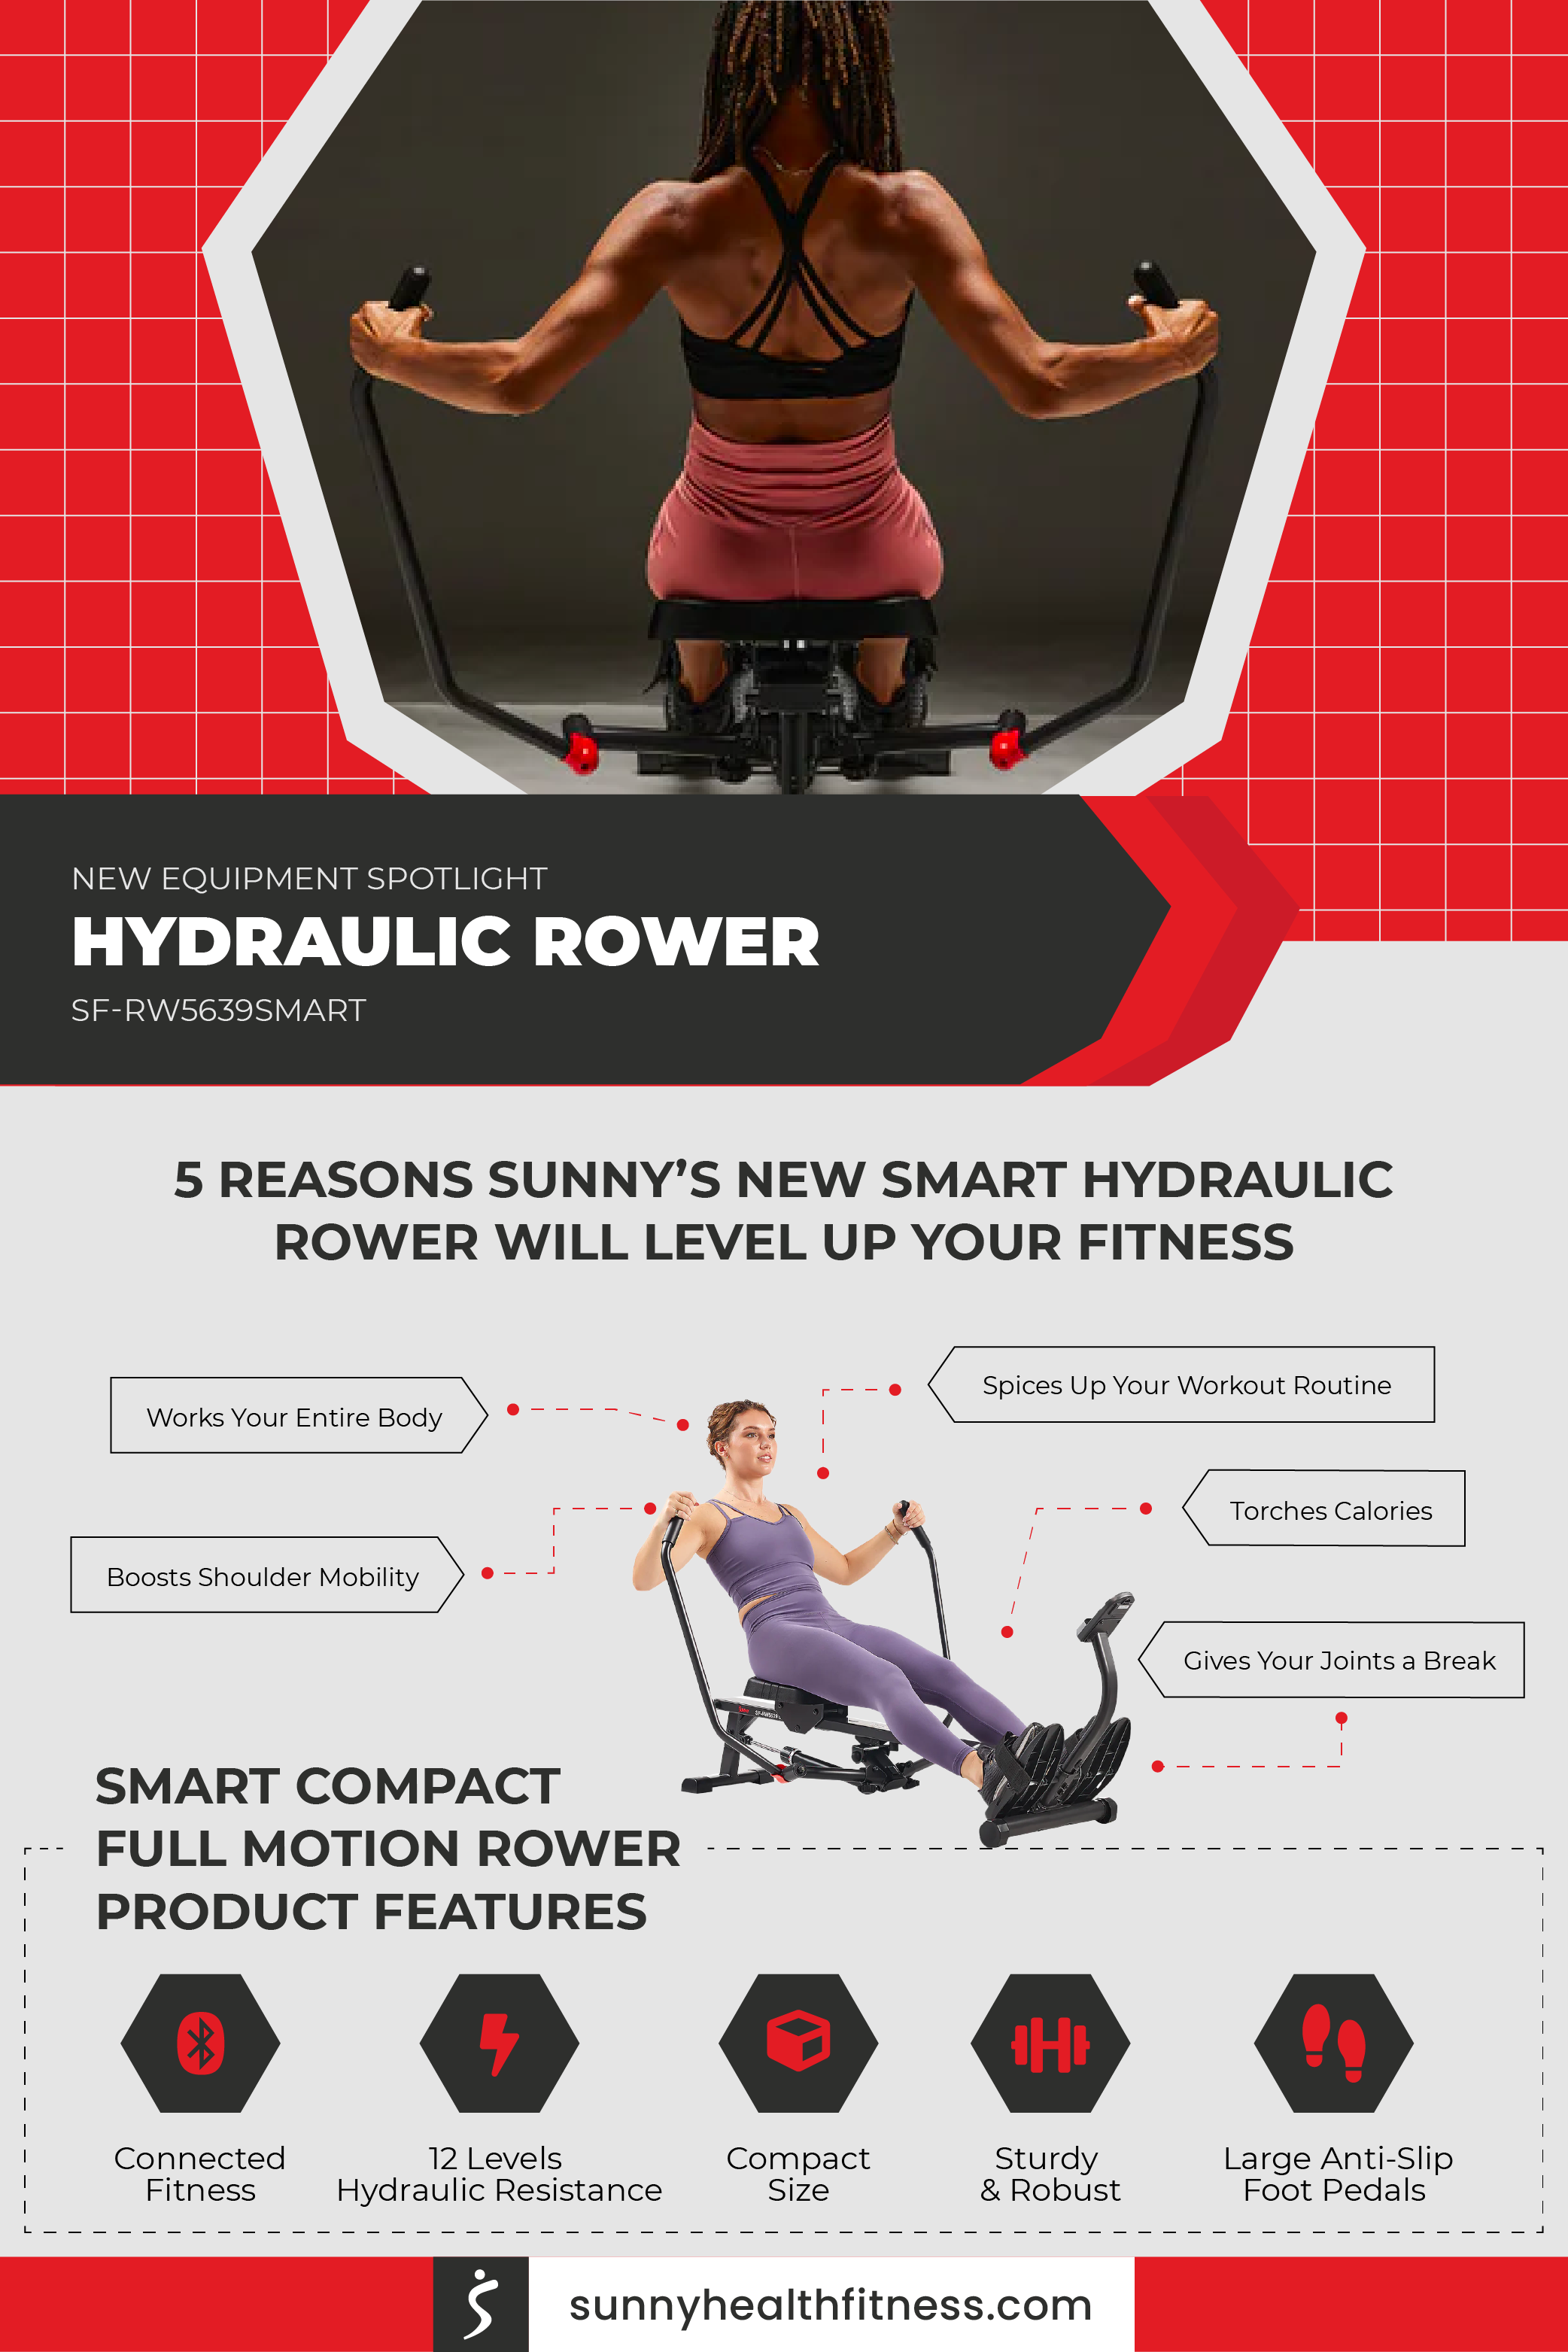 The Hydraulic Rower Infographic